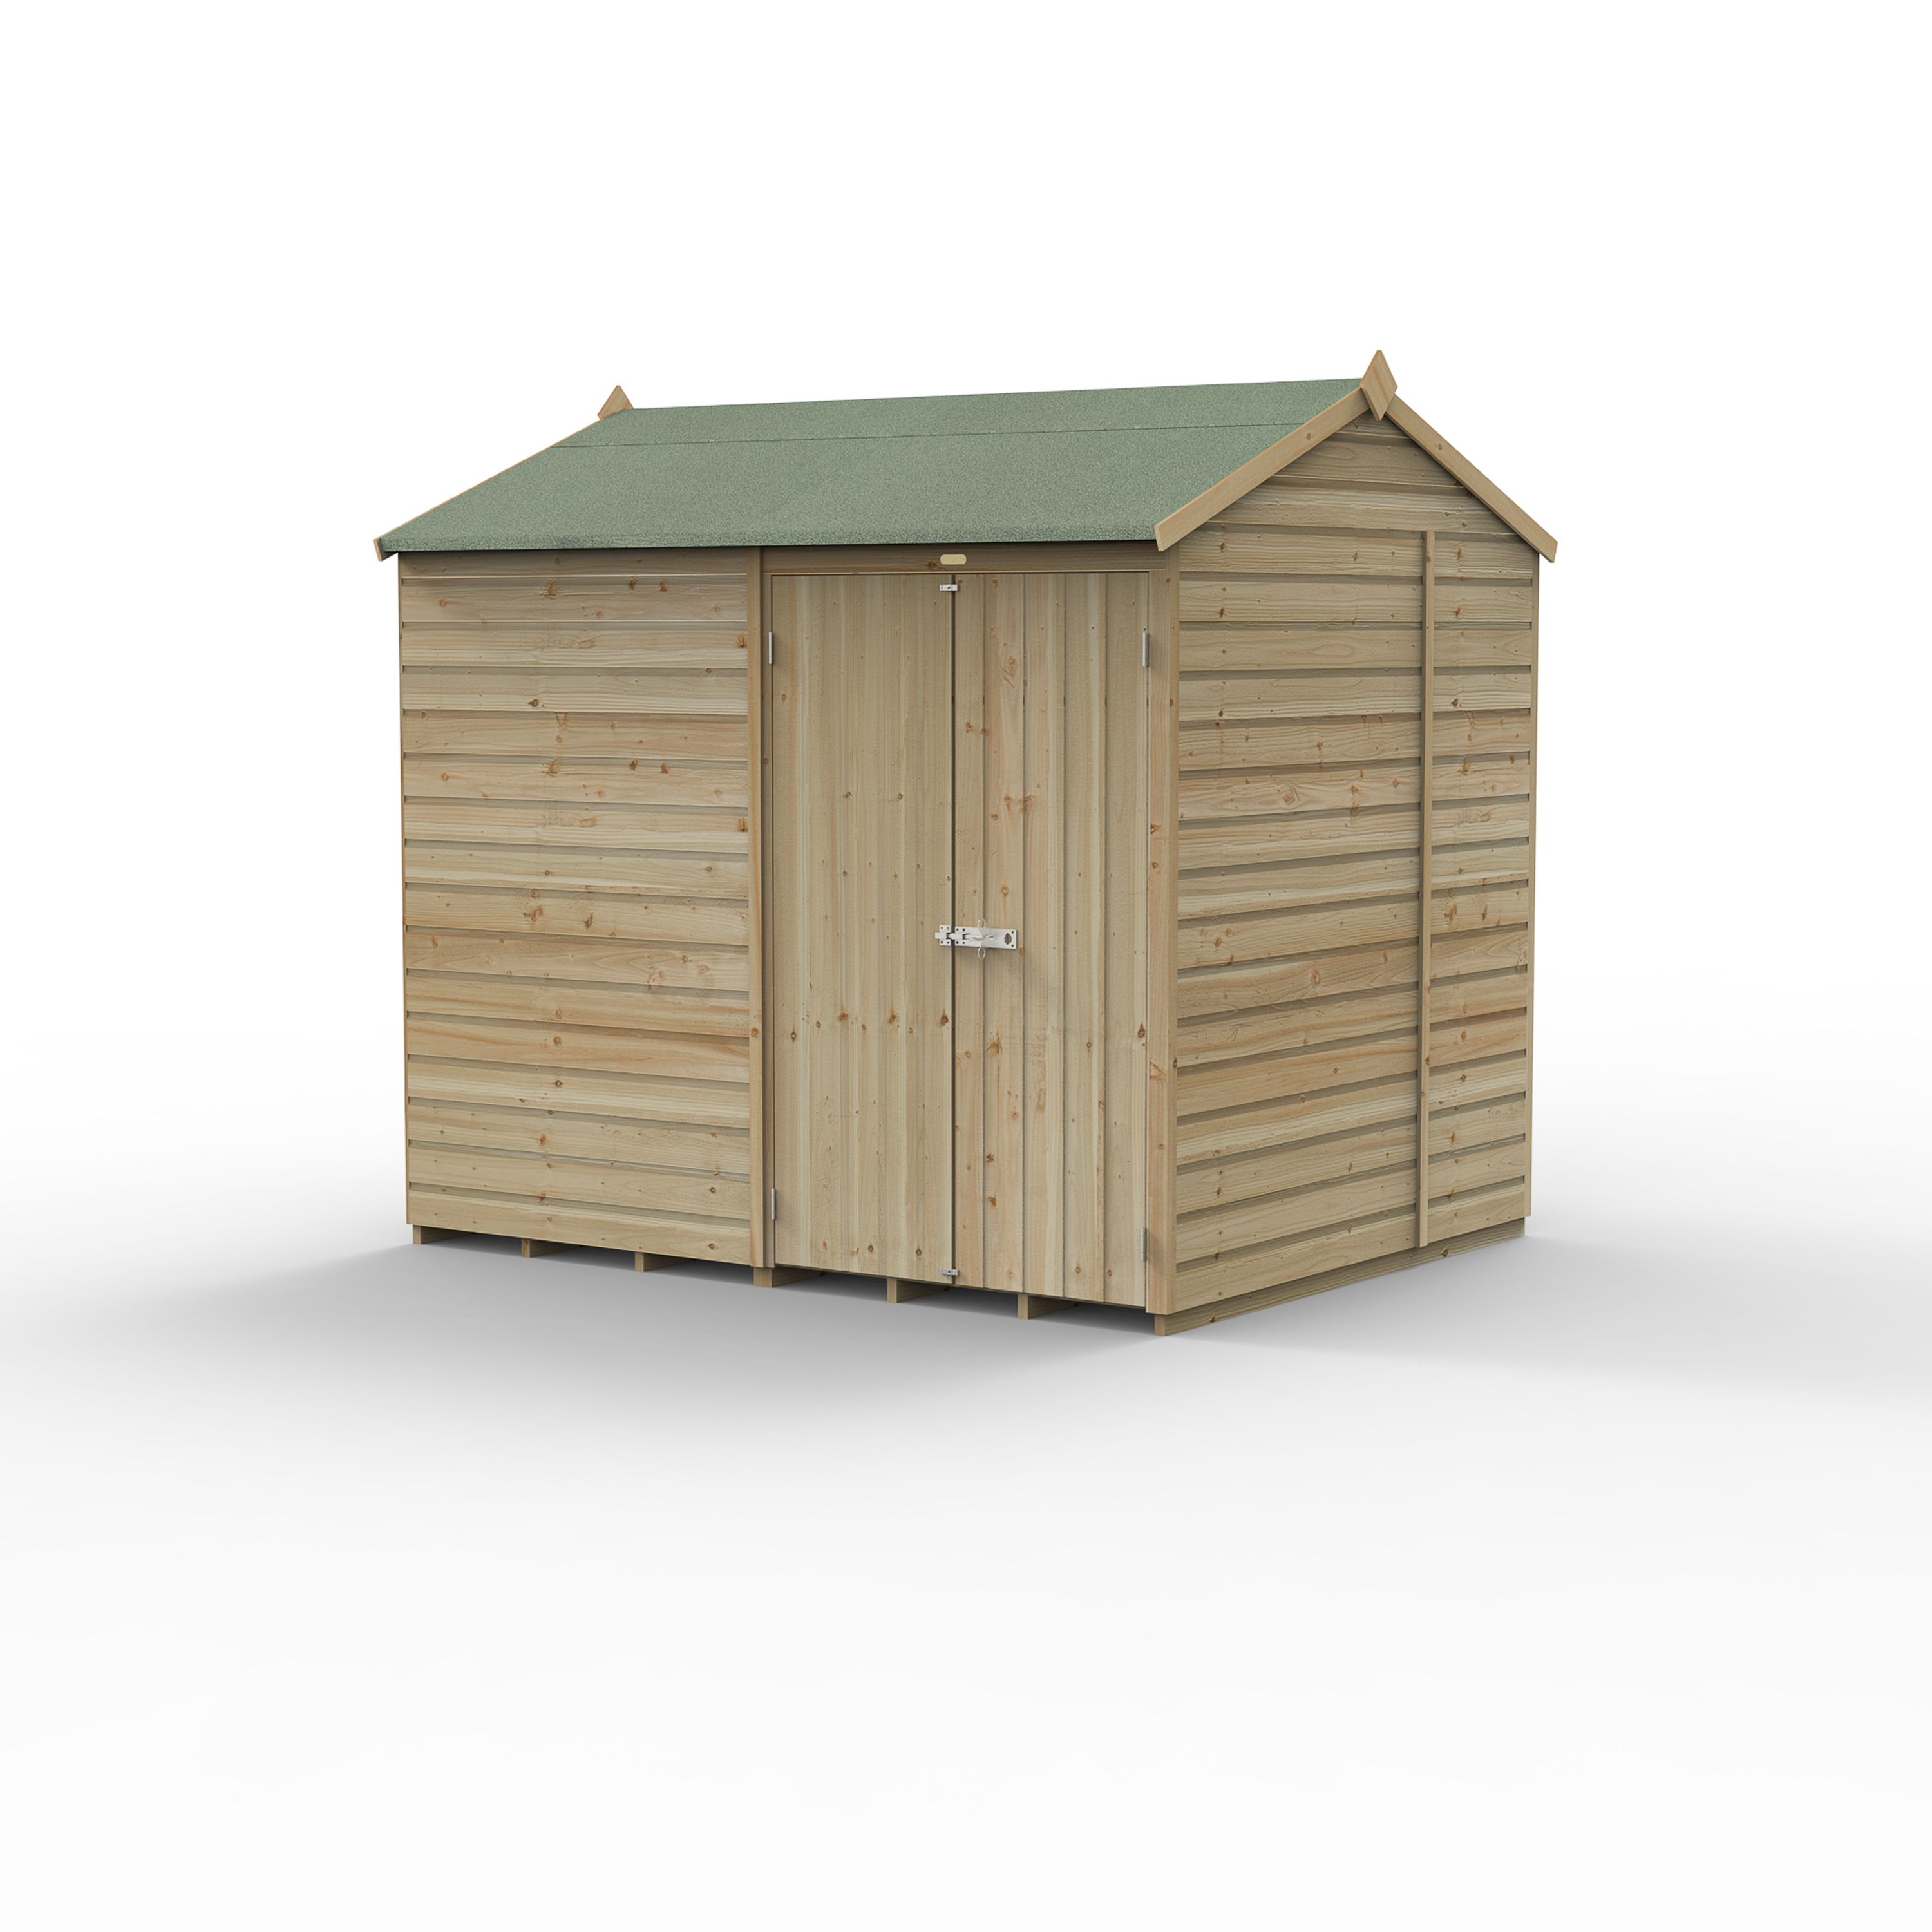 Forest Garden Beckwood 8x6 ft Reverse apex Natural timber Wooden 2 door Shed with floor